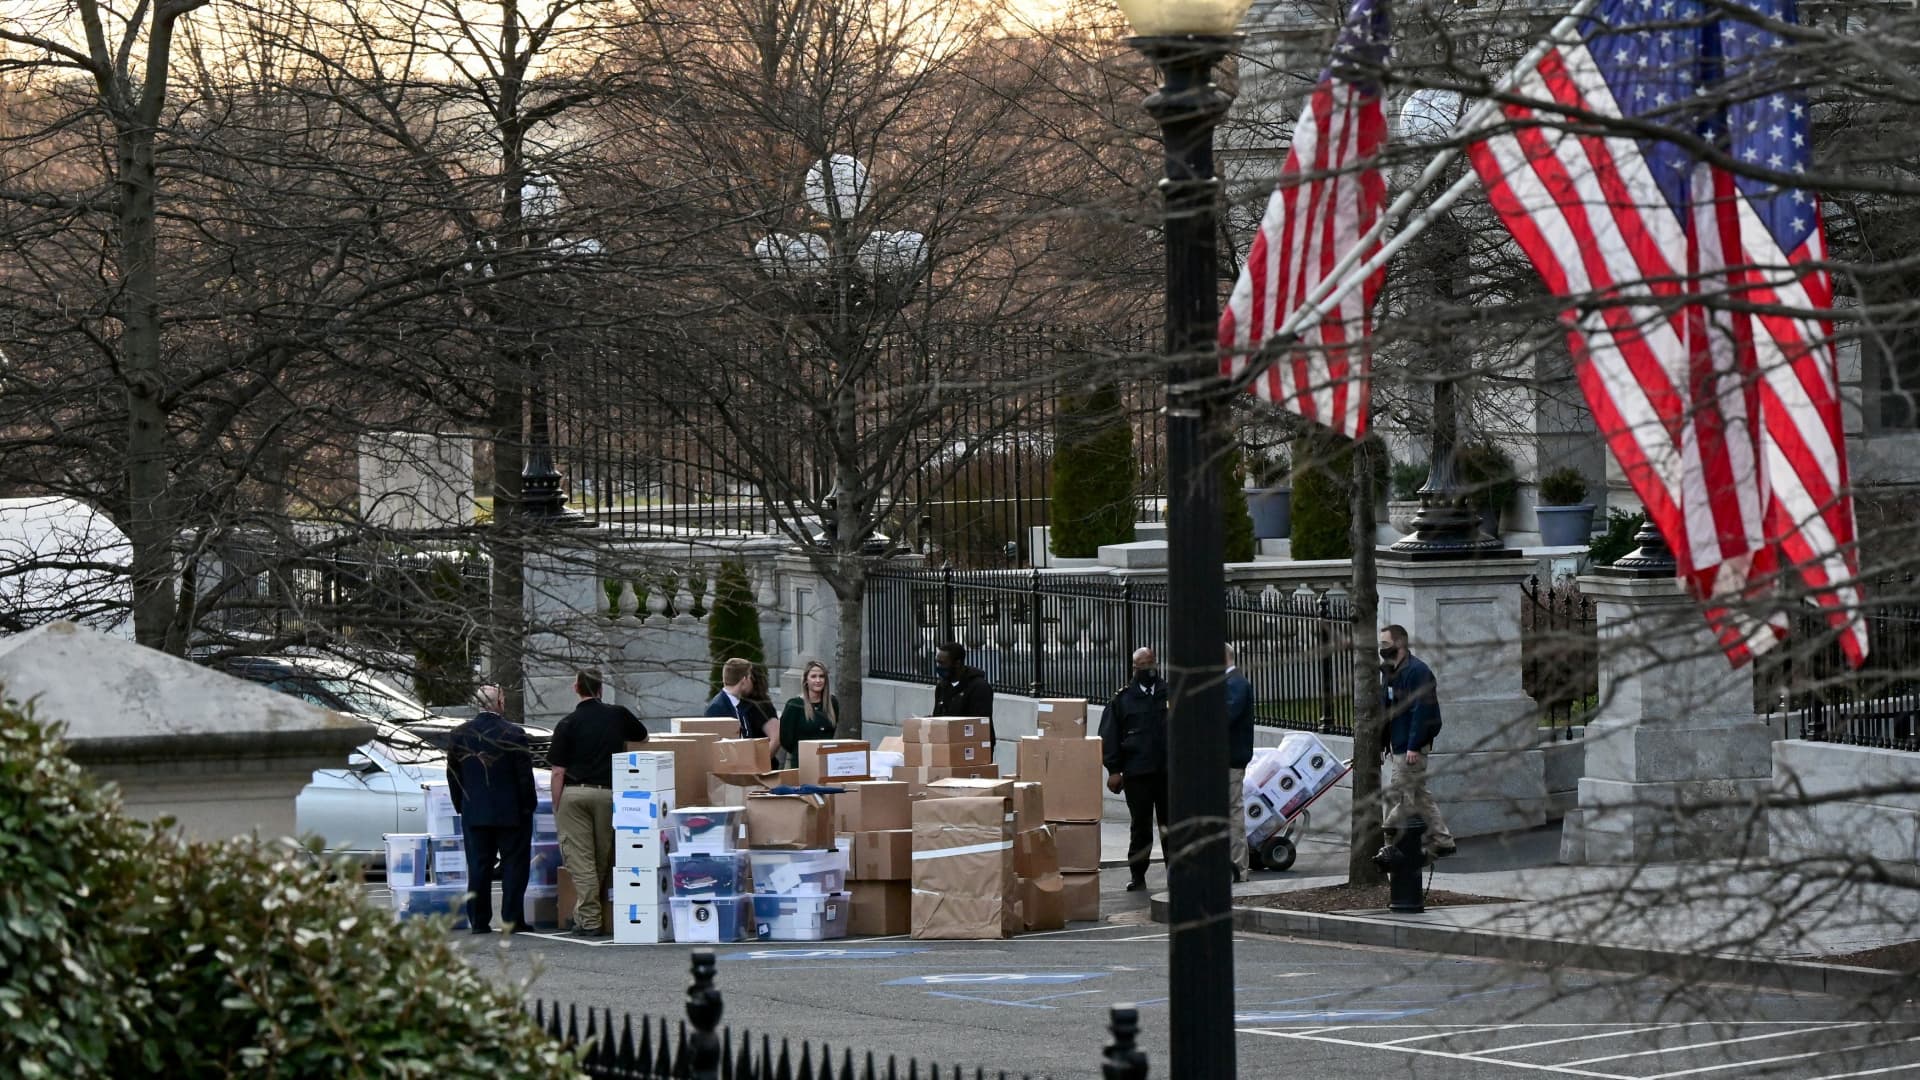 Workers move boxes out of the Eisenhower Executive Office Building on the White House grounds, before the departure of U.S. President Donald Trump, in Washington, January 14, 2021.